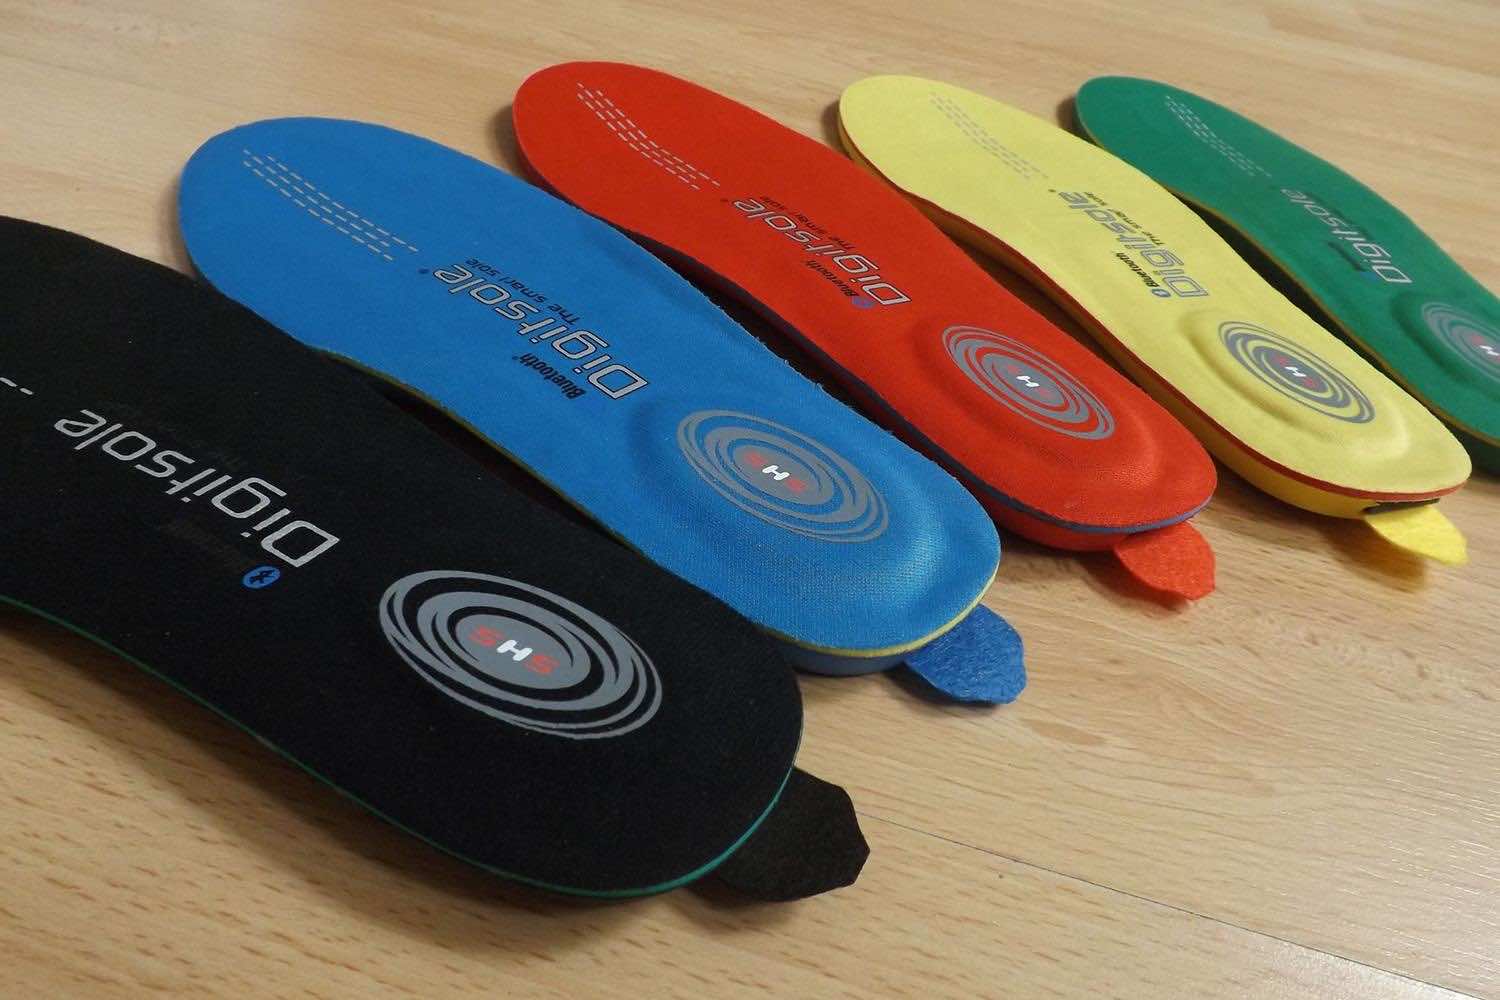 Digitsole - The techy insole5